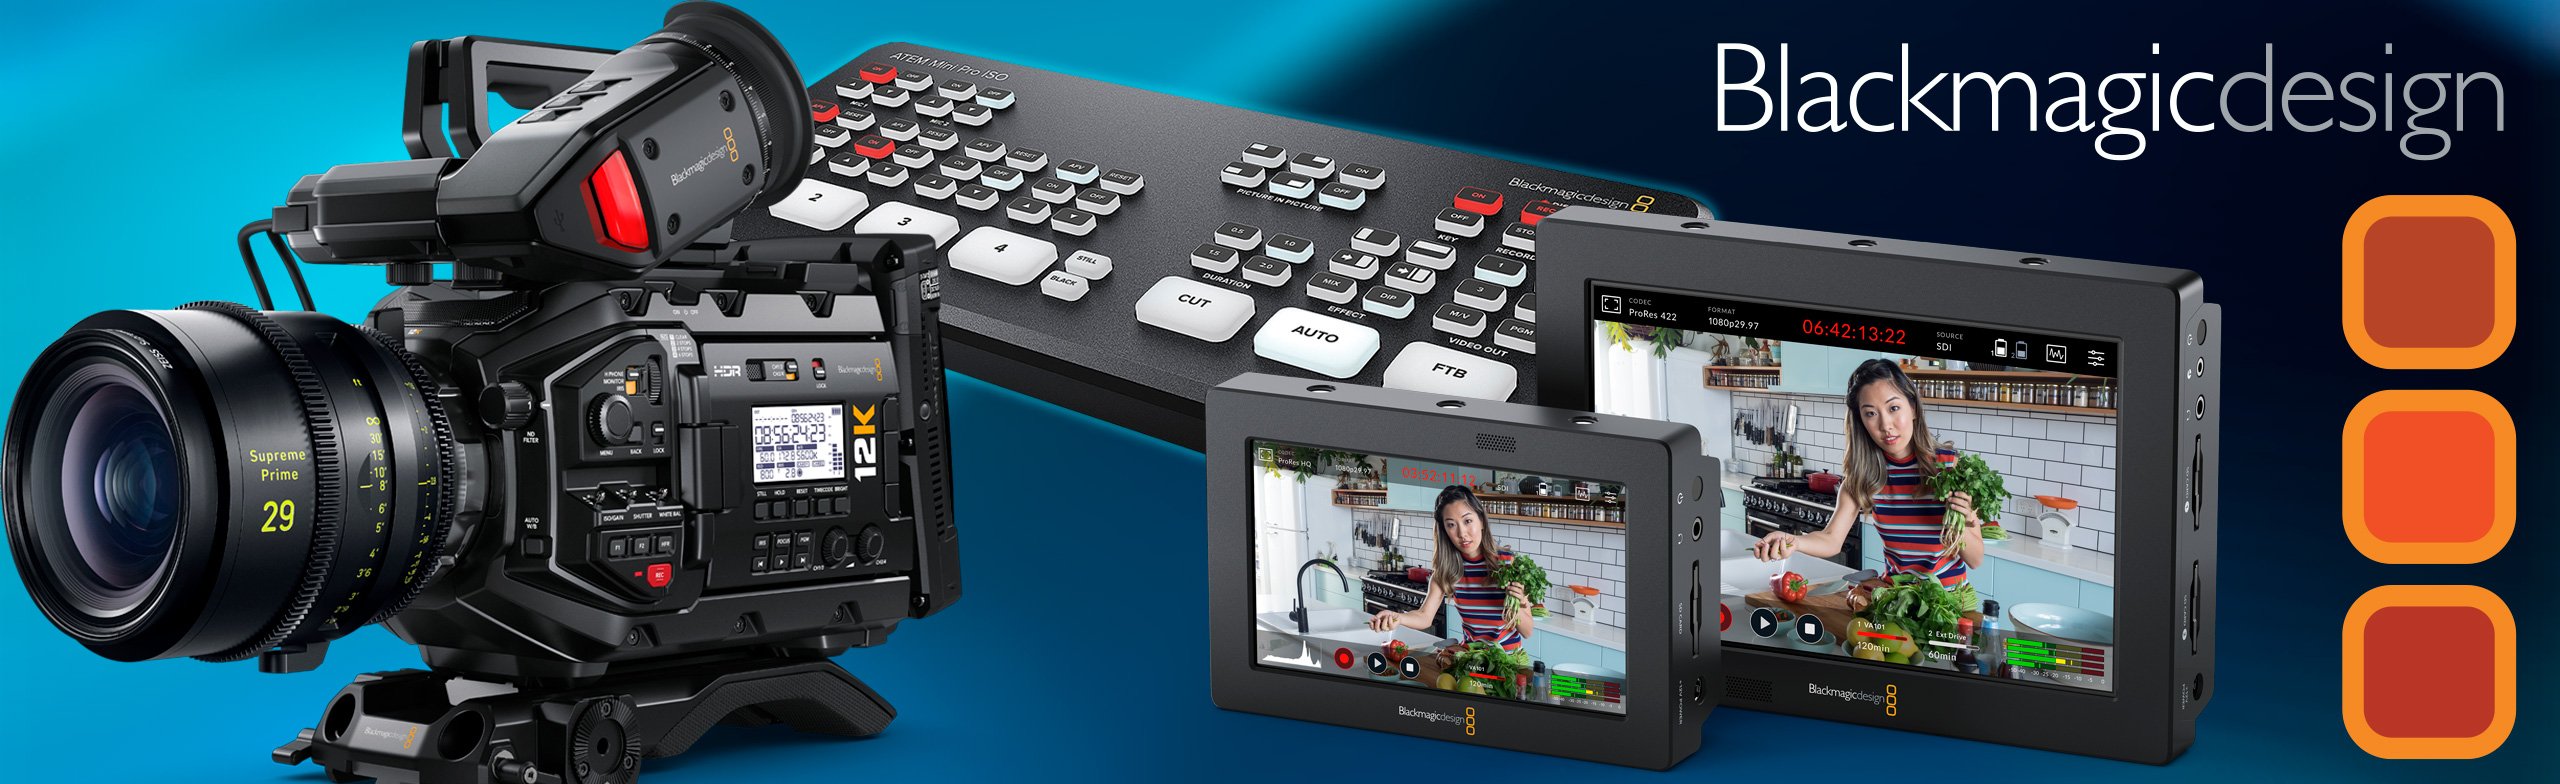 all of the latest blackmagic gear from markertek